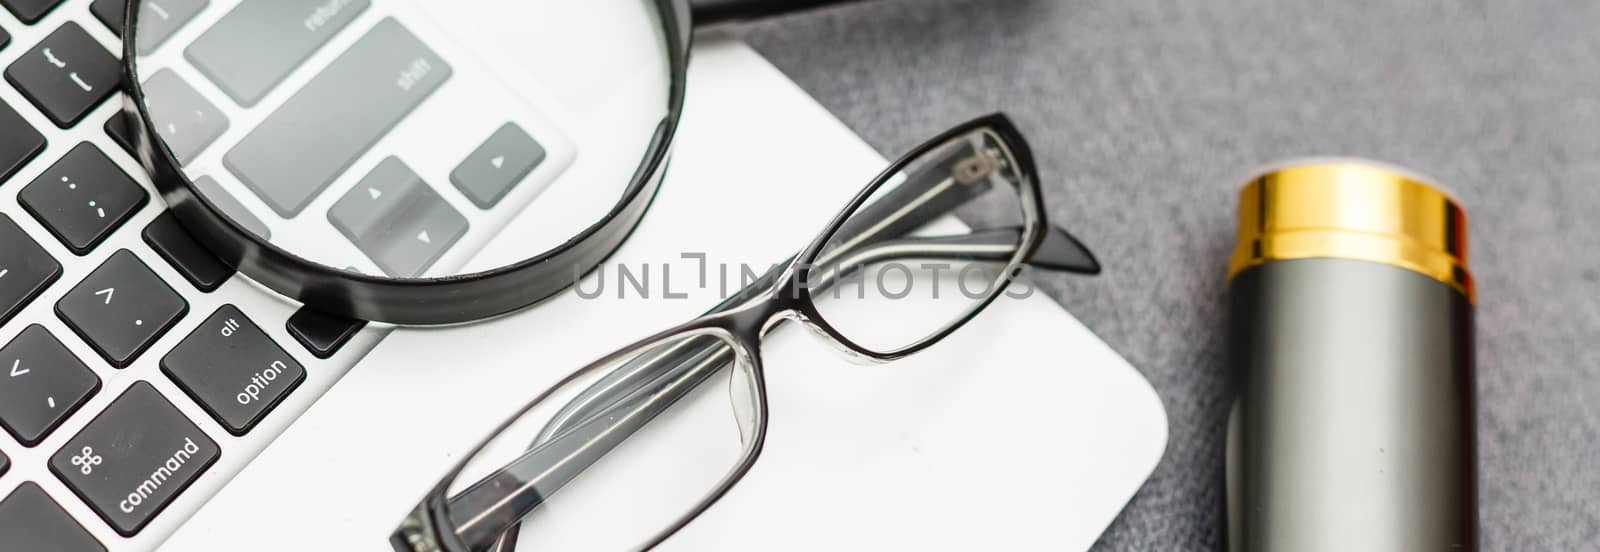 Business summary reports and a magnifying glass with glasses on table office. Concept of Data Analysis, Investment Planning, Business Analytics. by Andelov13